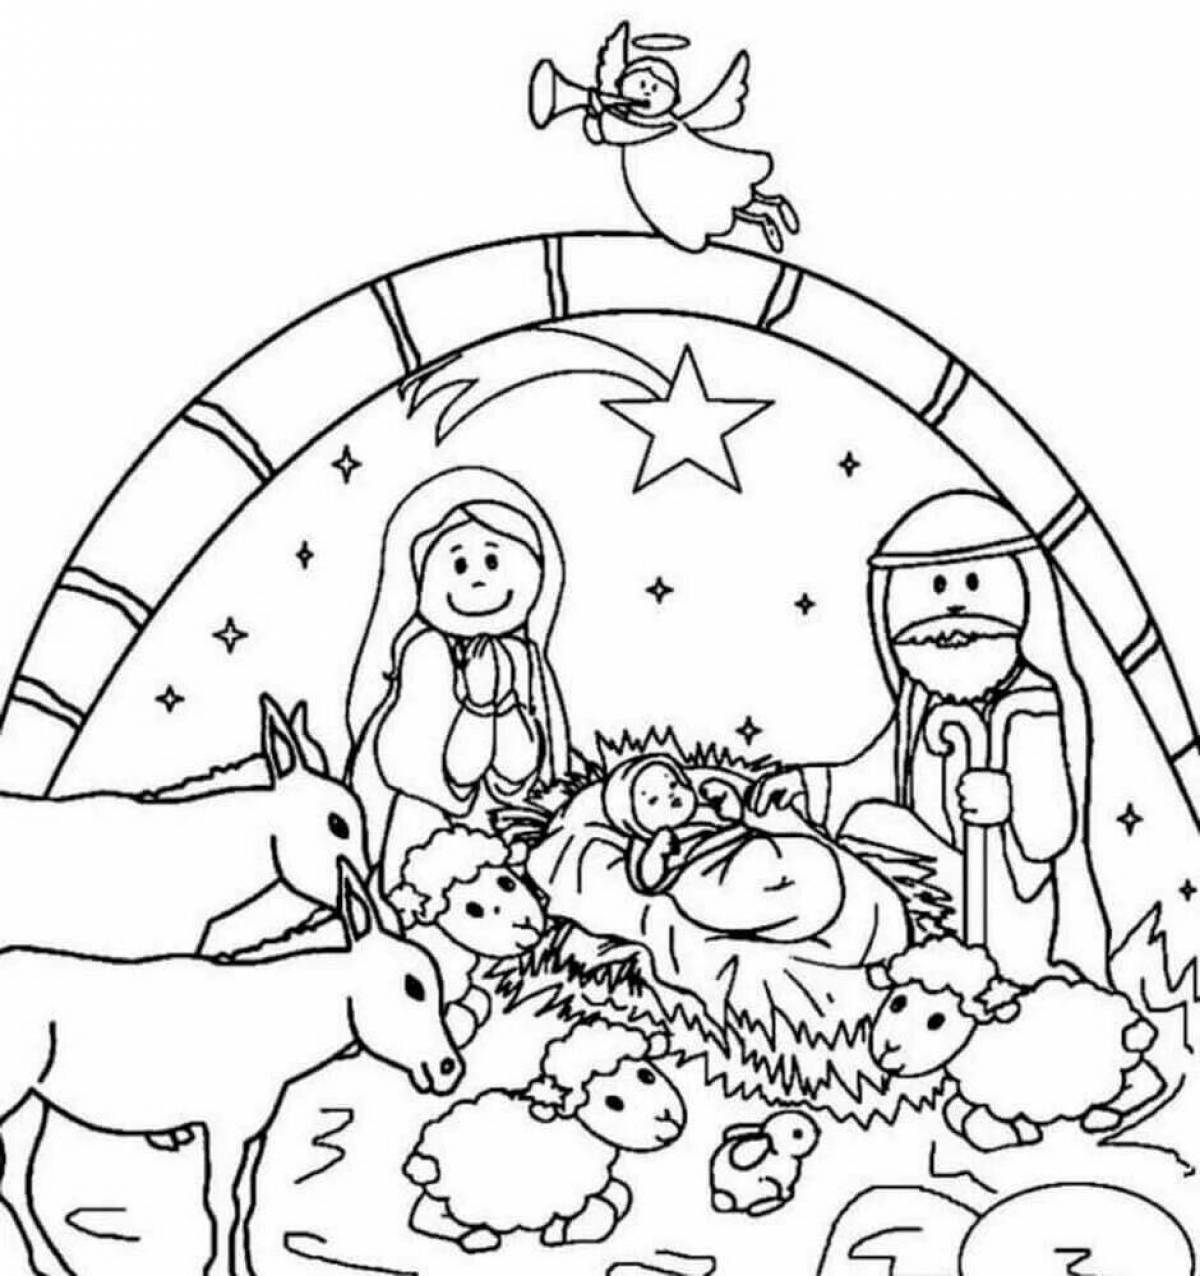 A playful Christmas coloring book for 3-4 year olds